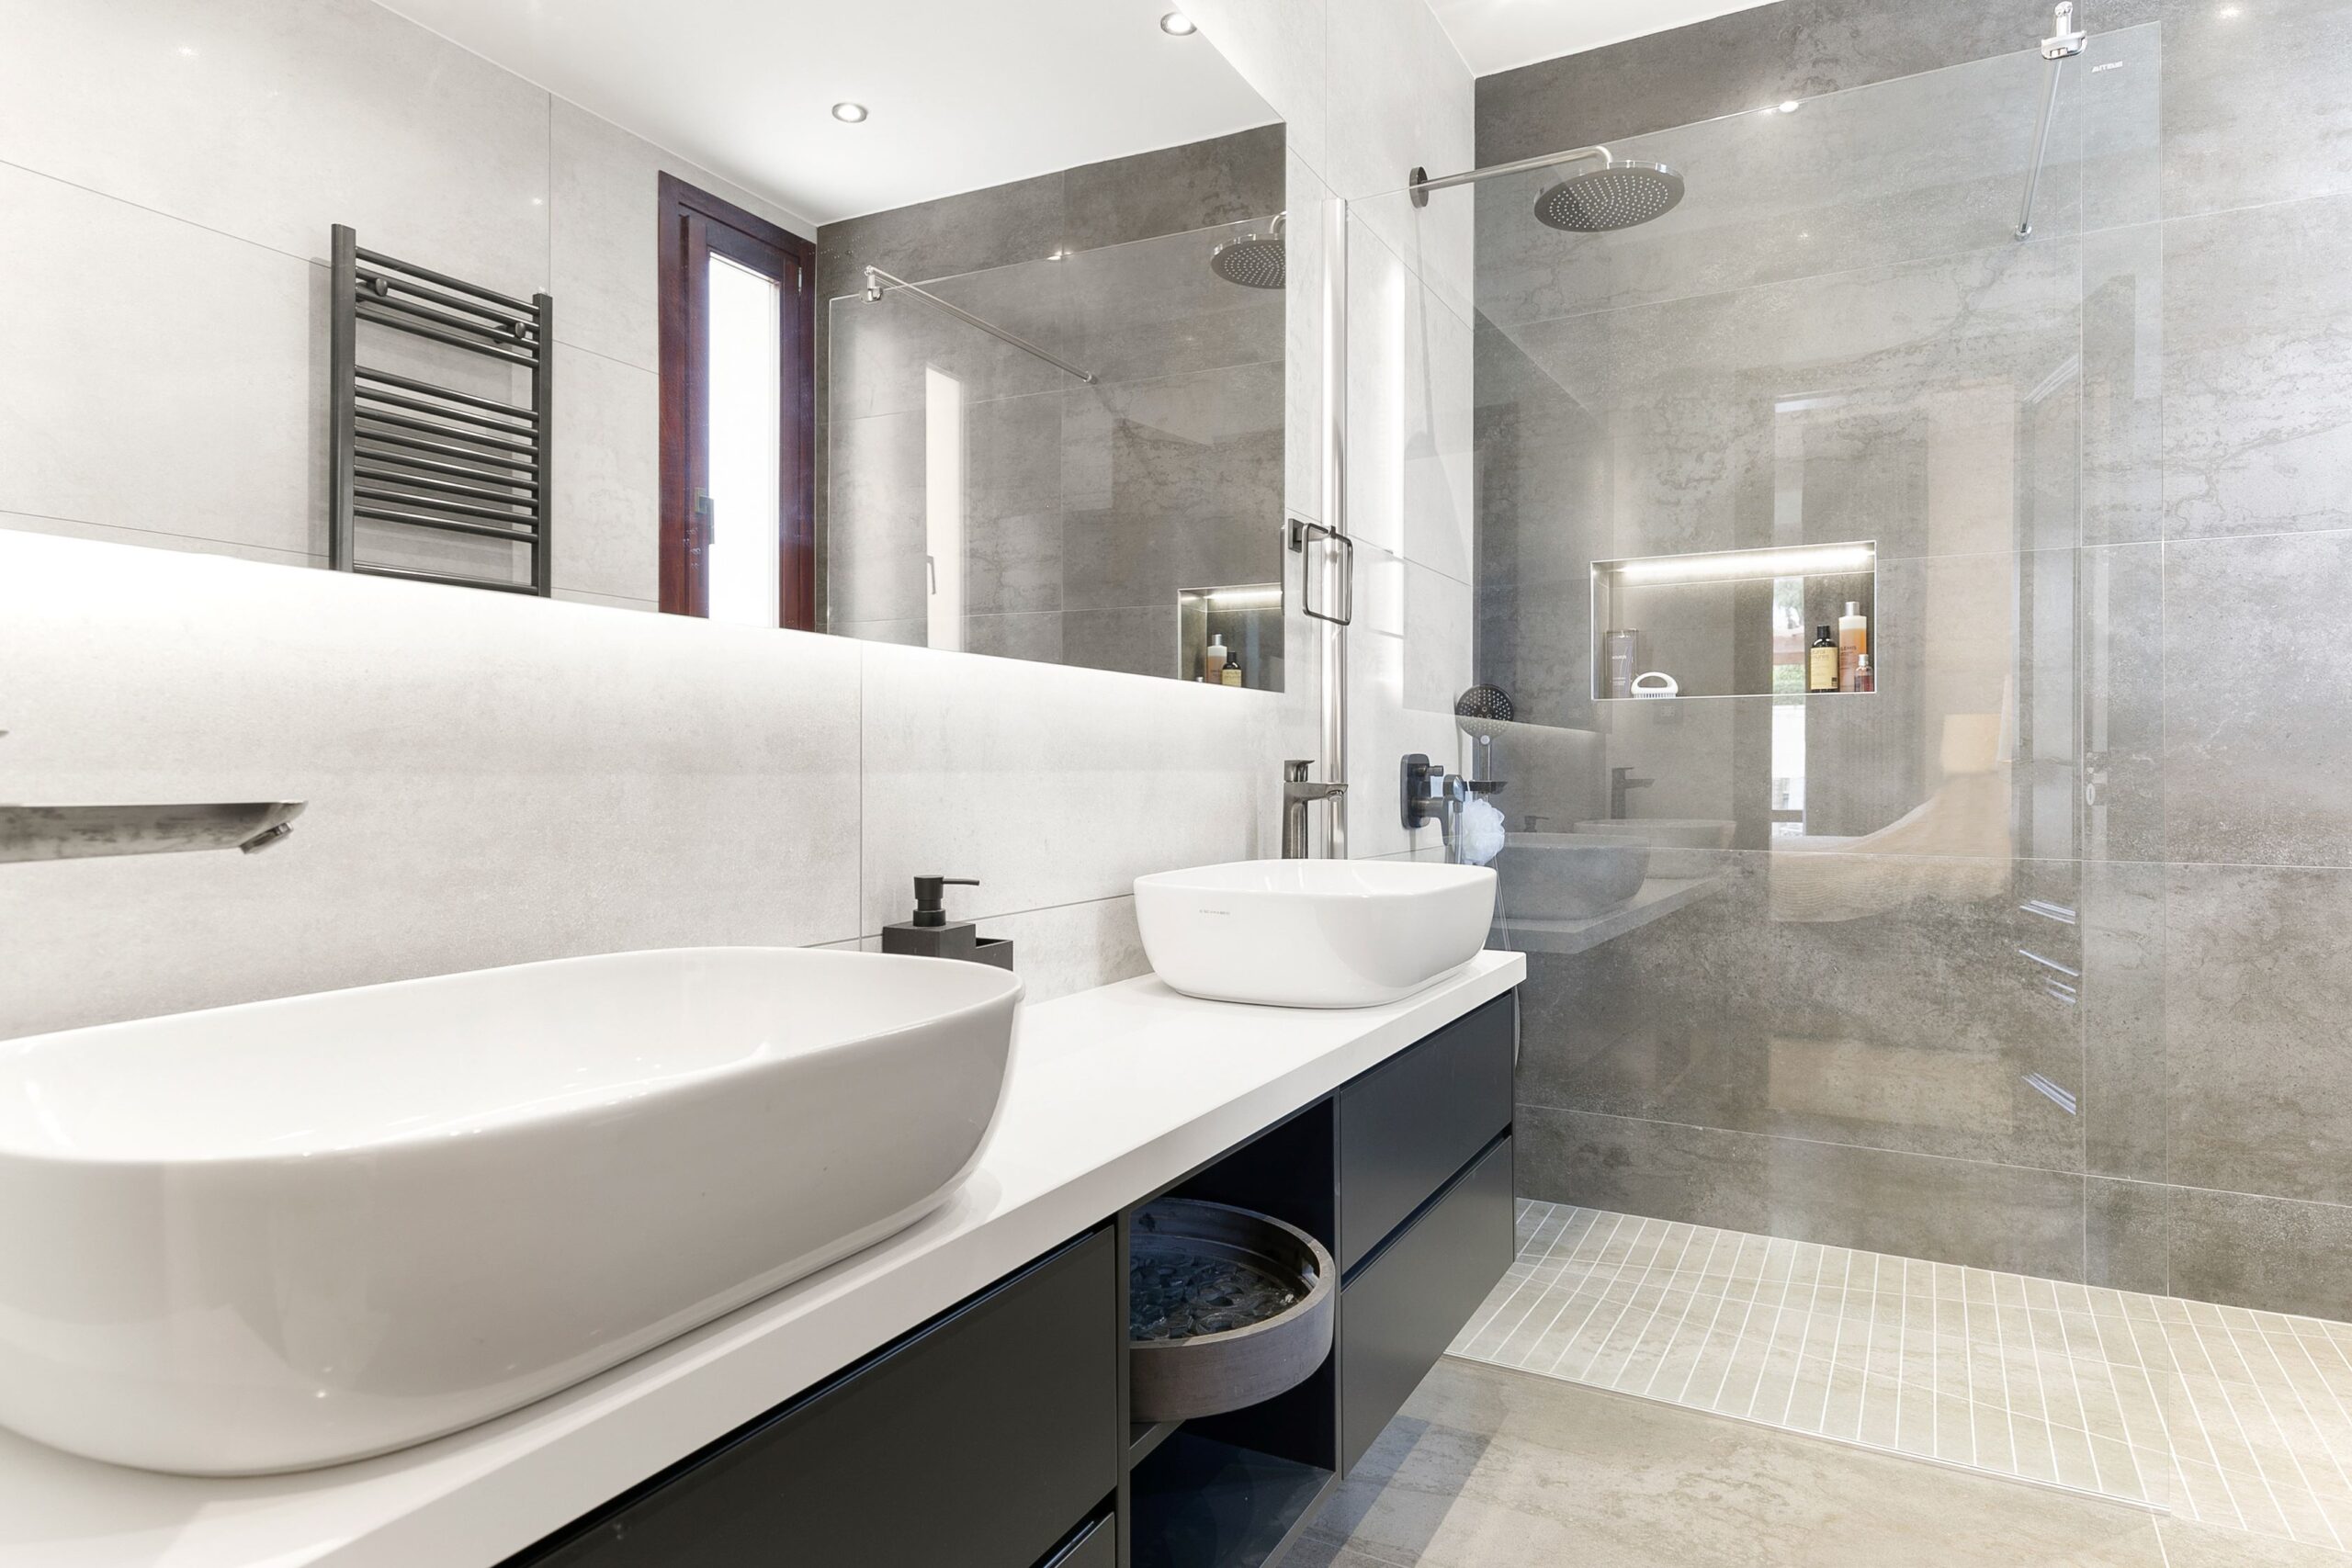 Modern Bathrooms – Why are they so Important?